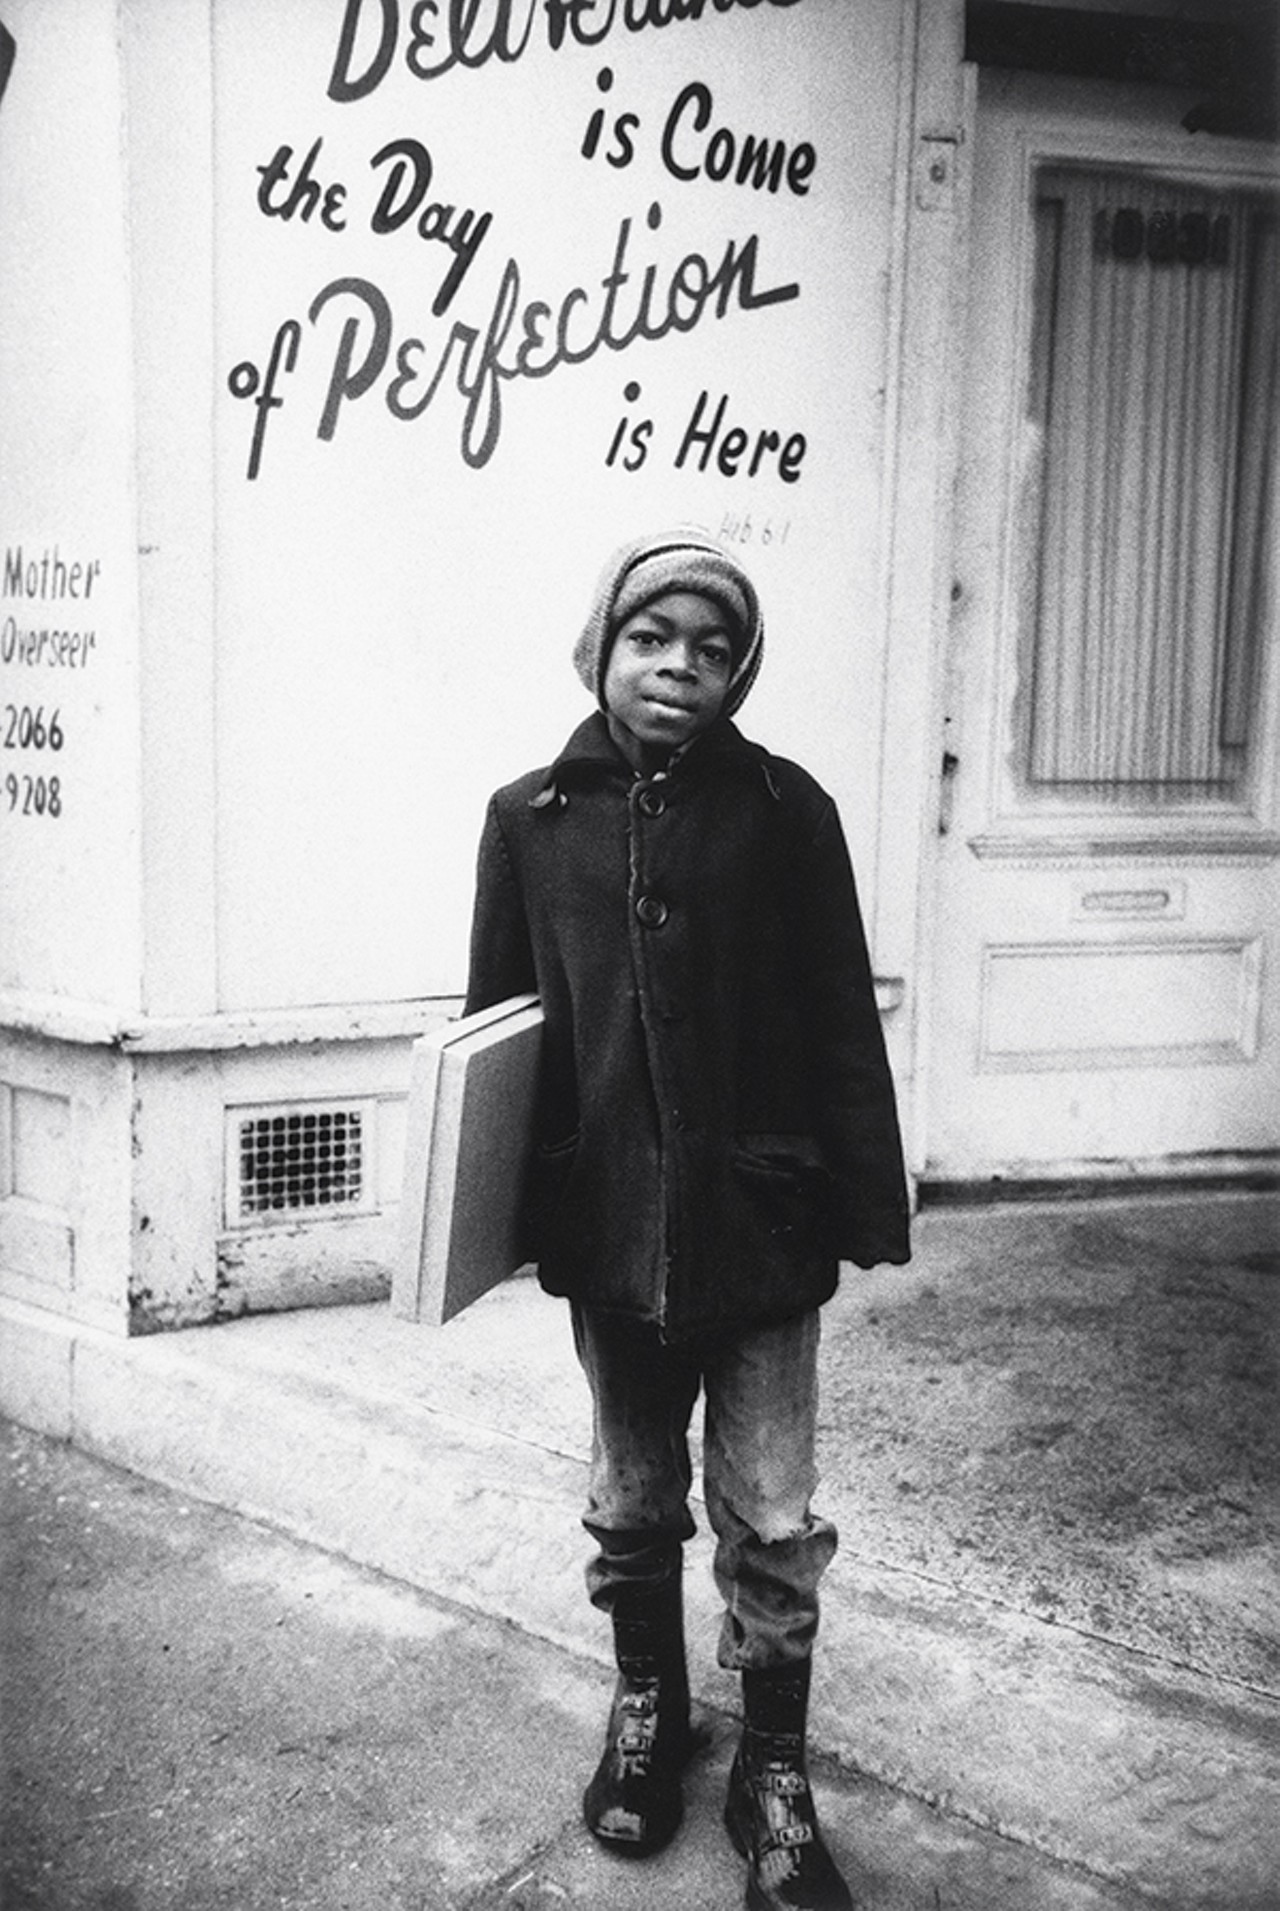 20 photos from "Detroit 1968" by Enrico Natali